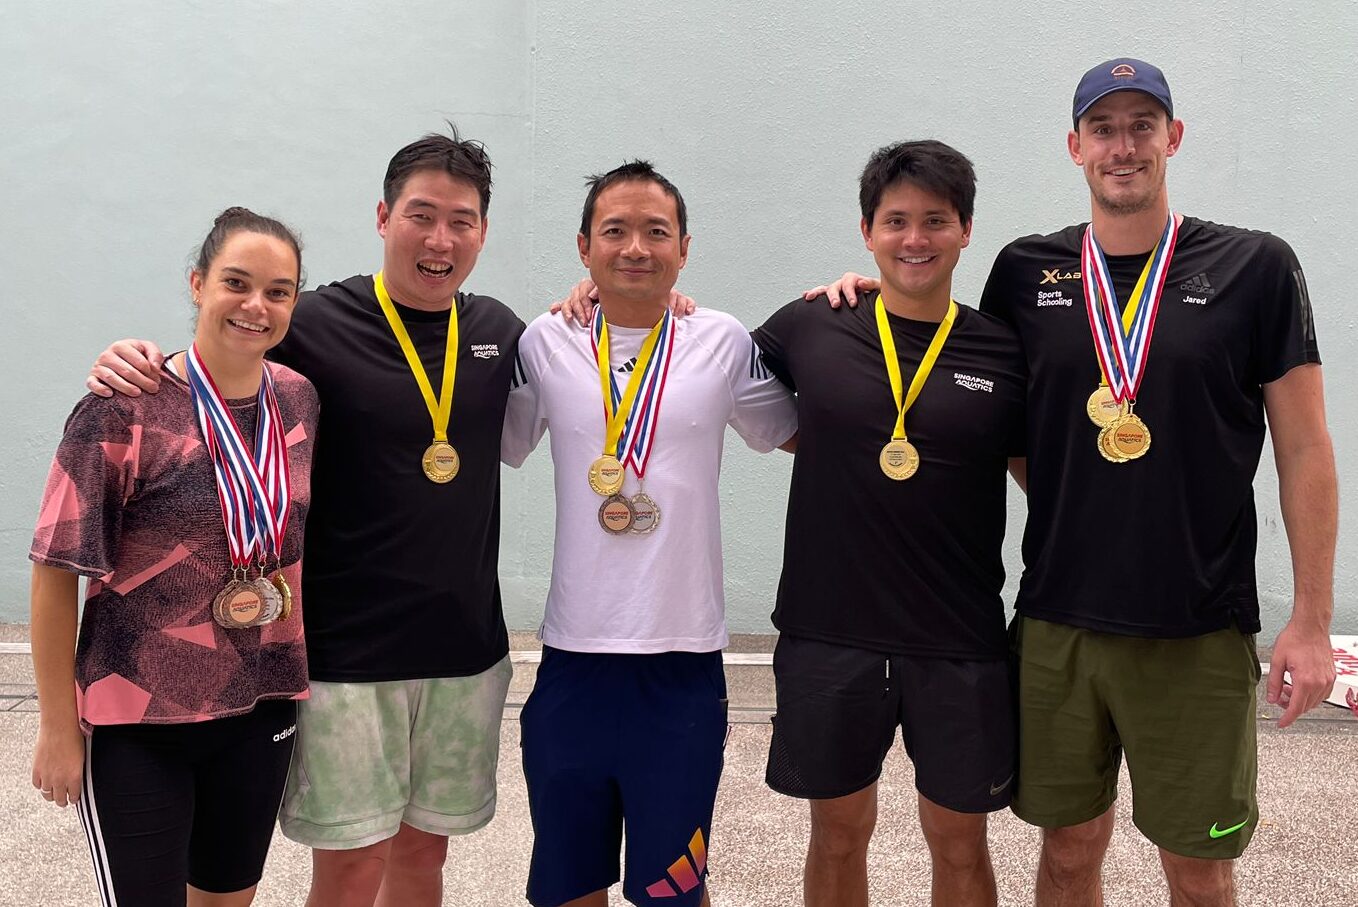 X Lab adult masters swimmers with gold medals at Masters competition